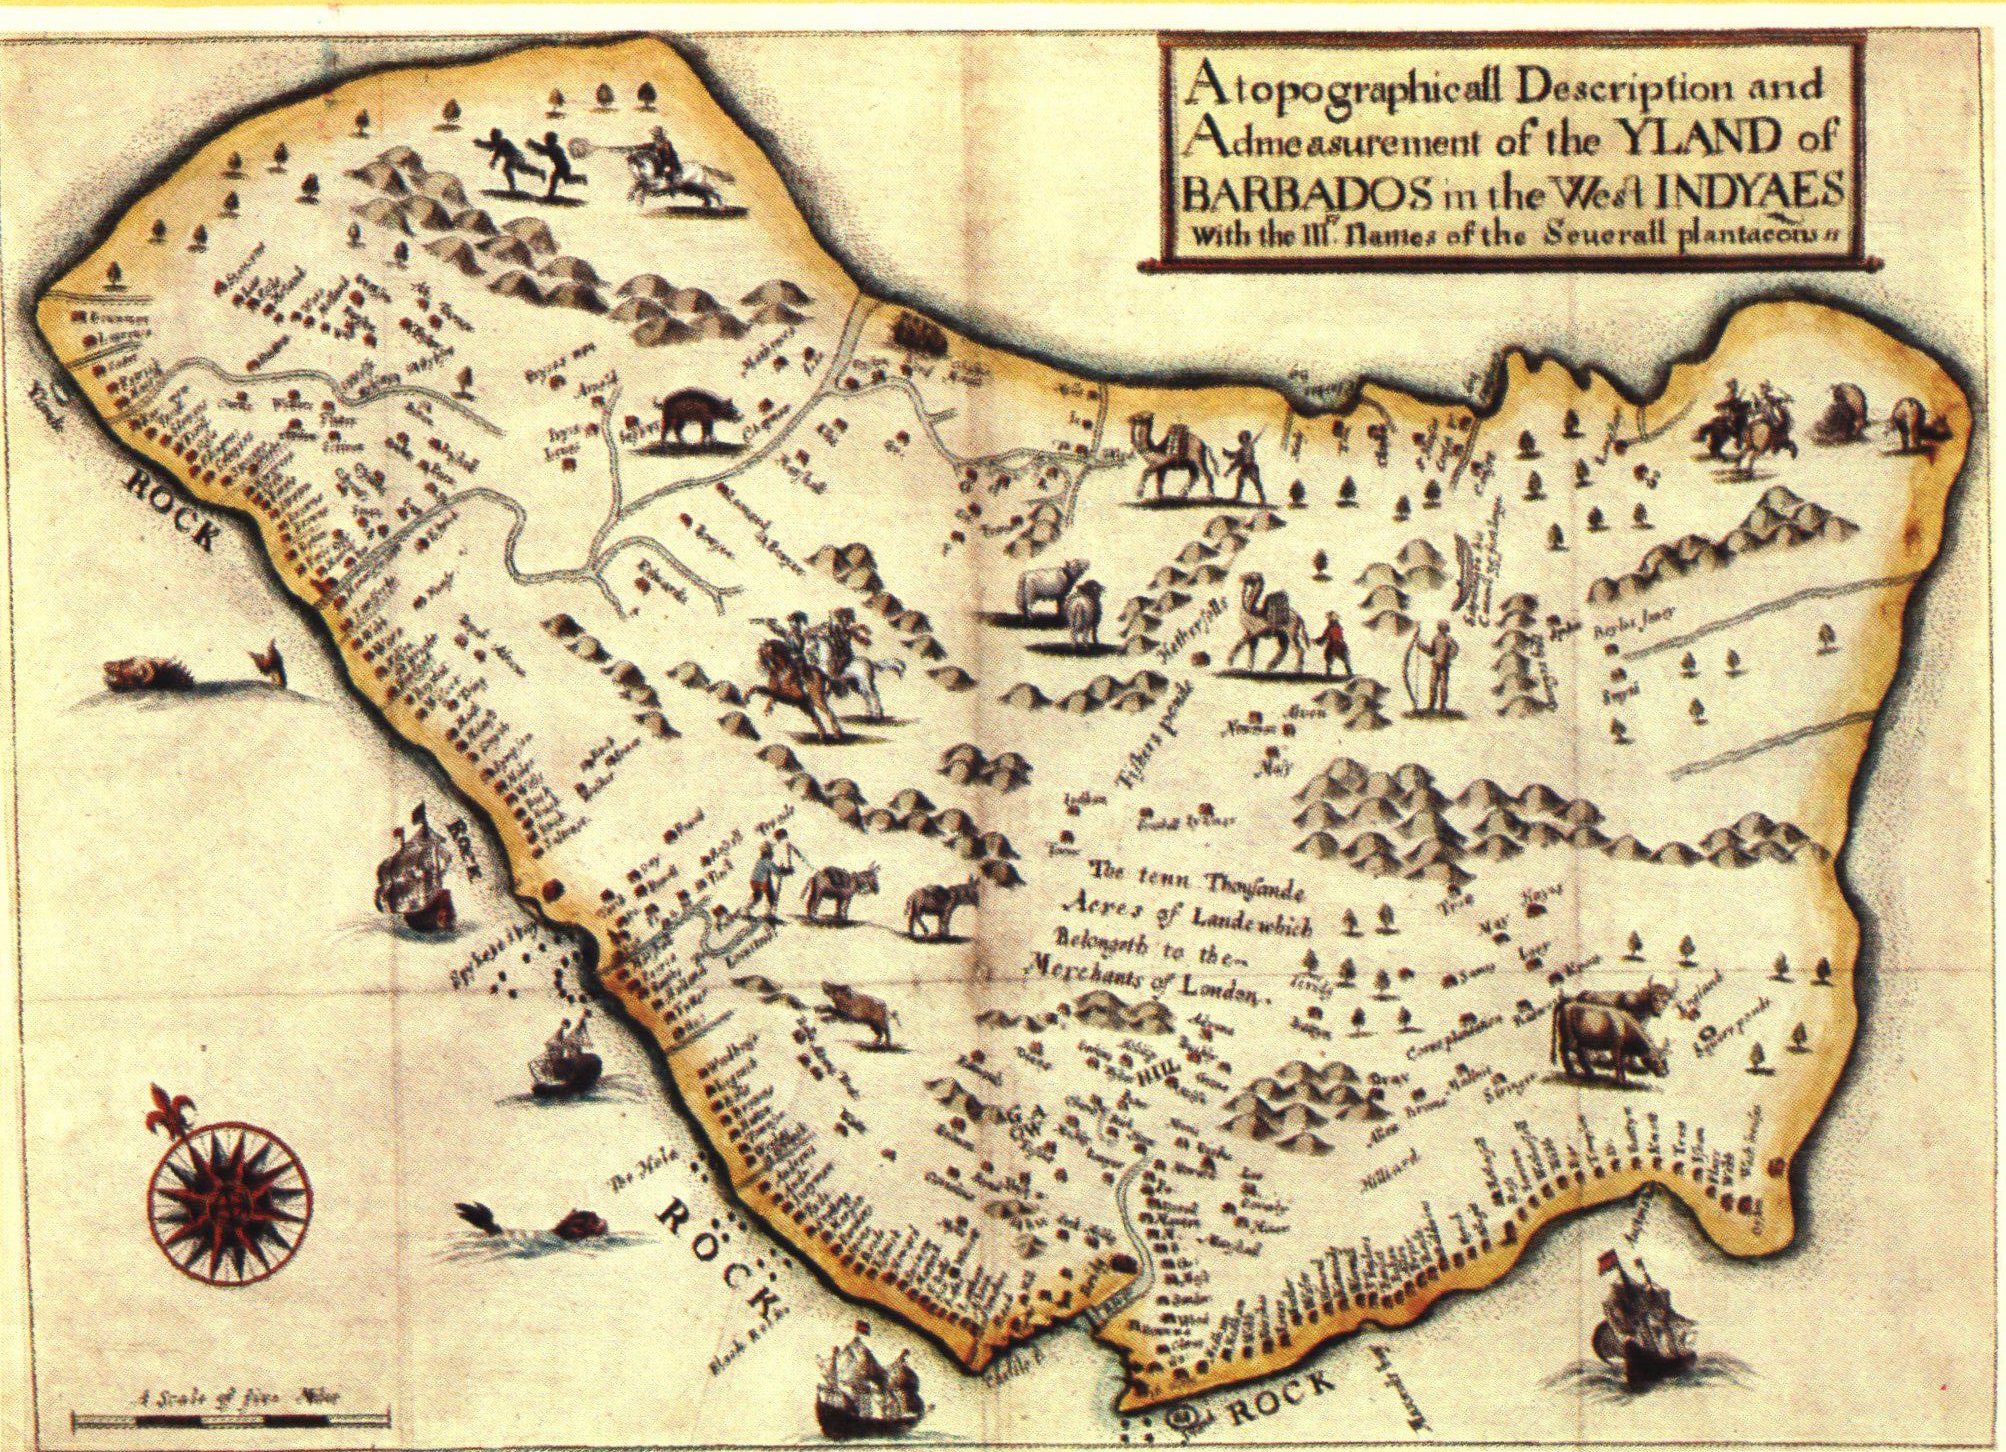 The earliest printed map of Barbados by Richard Ligon, 1657AnonymousUnknown author, CC BY 4.0 , via Wikimedia Commons